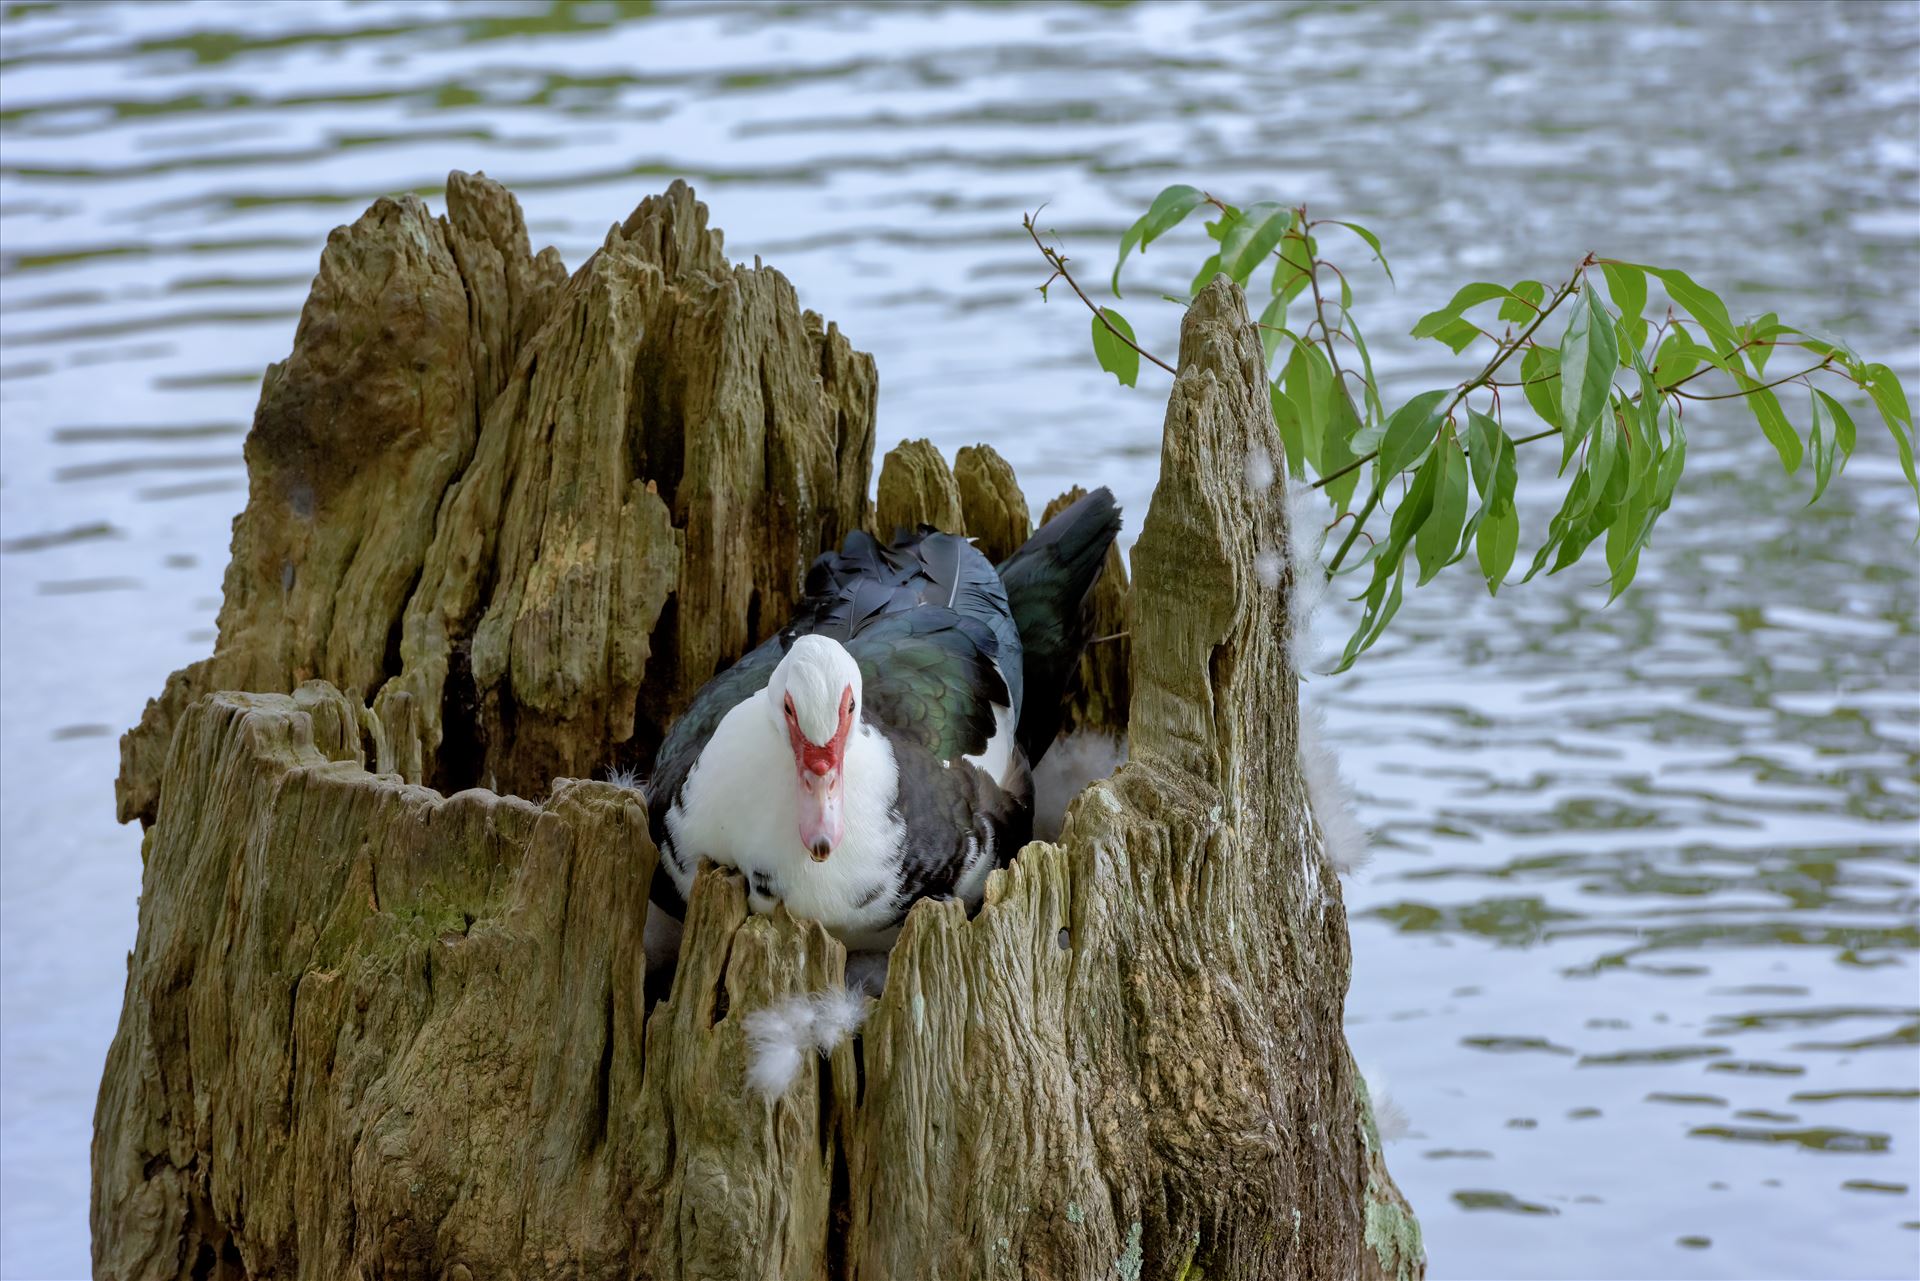 duck sitting on eggs in hollowed out tree stump lake caroline ss alamy 8106733.jpg  by Terry Kelly Photography